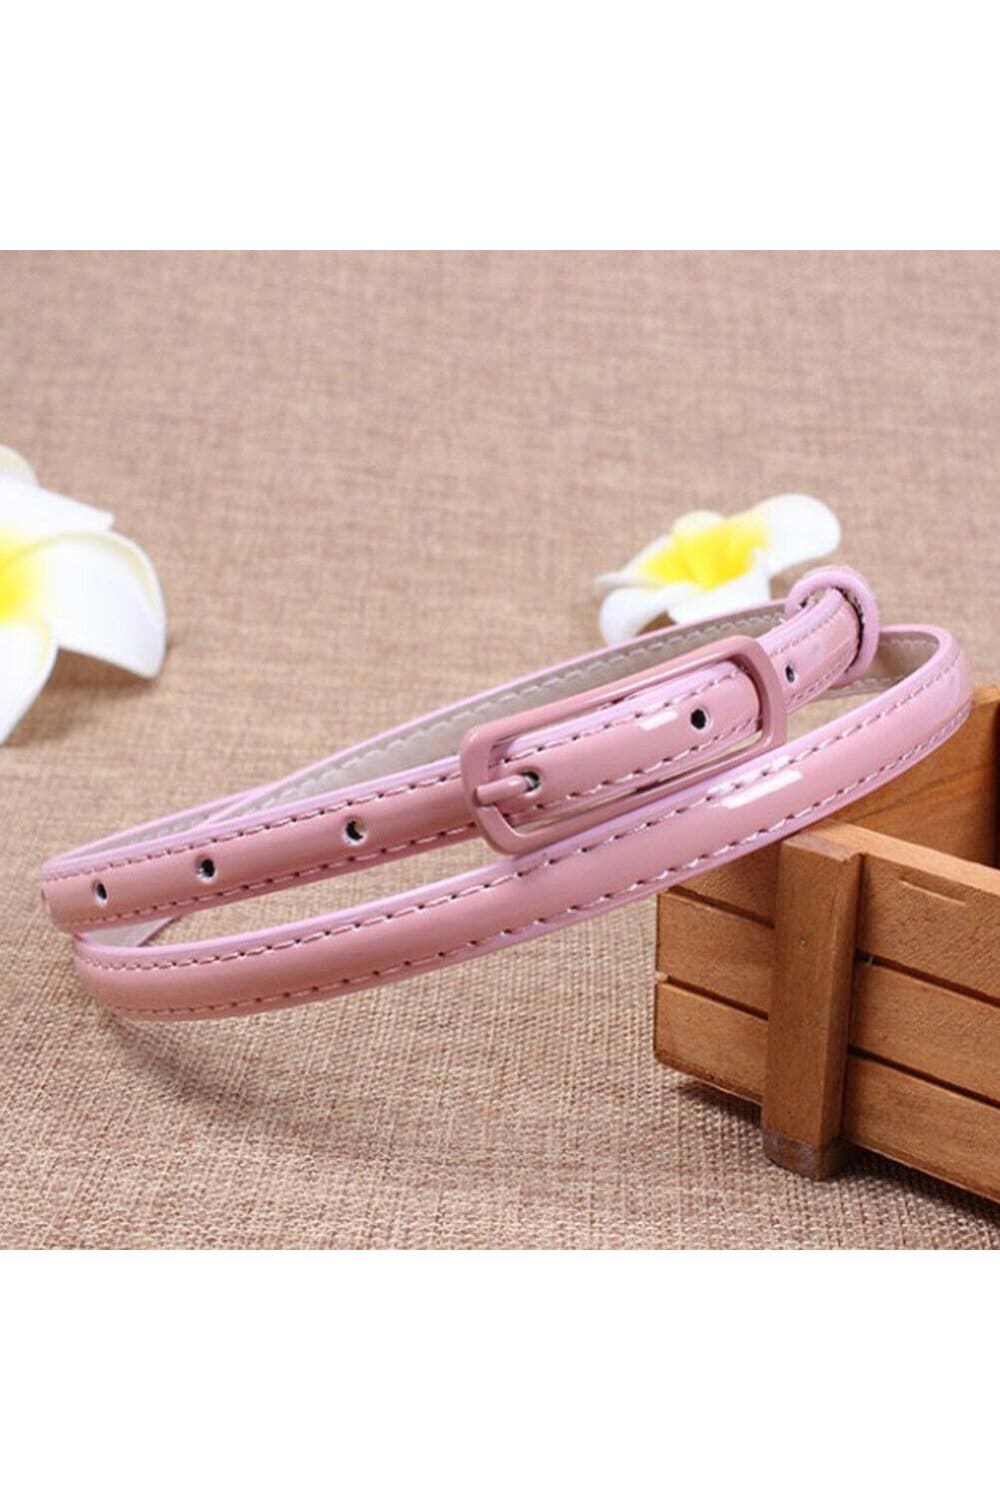 Elegant and Classy Colorful Leather Belt for Women - 105cm x 1.2cm Fatio General Trading